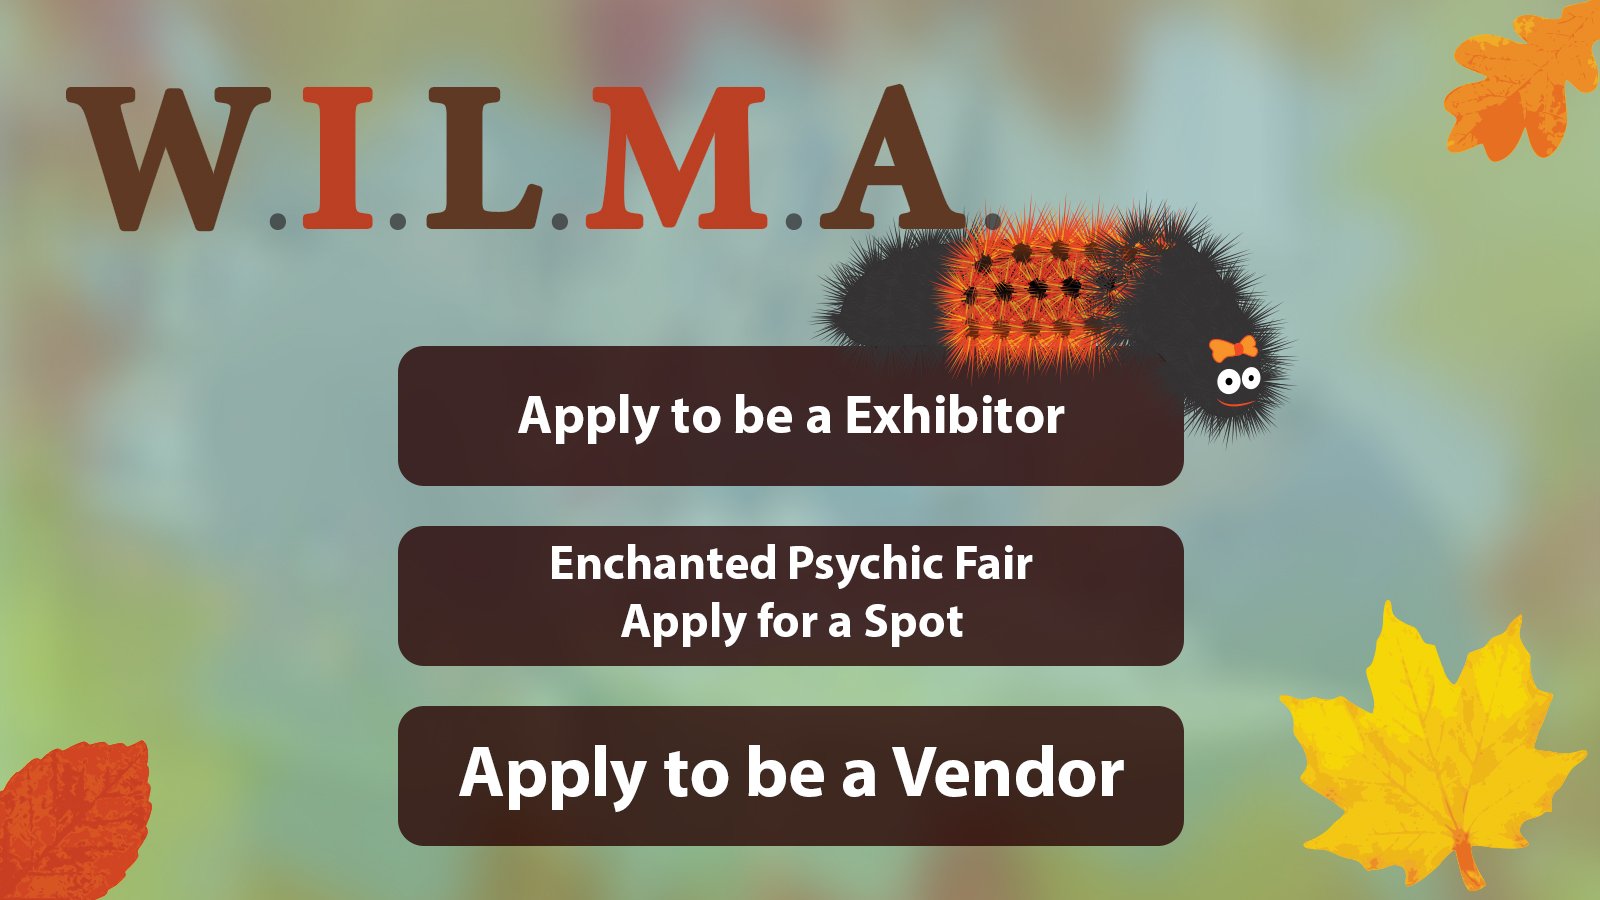 WILMA: Apply to be an exhibitor, Enchanted Psychic Fair, vendor